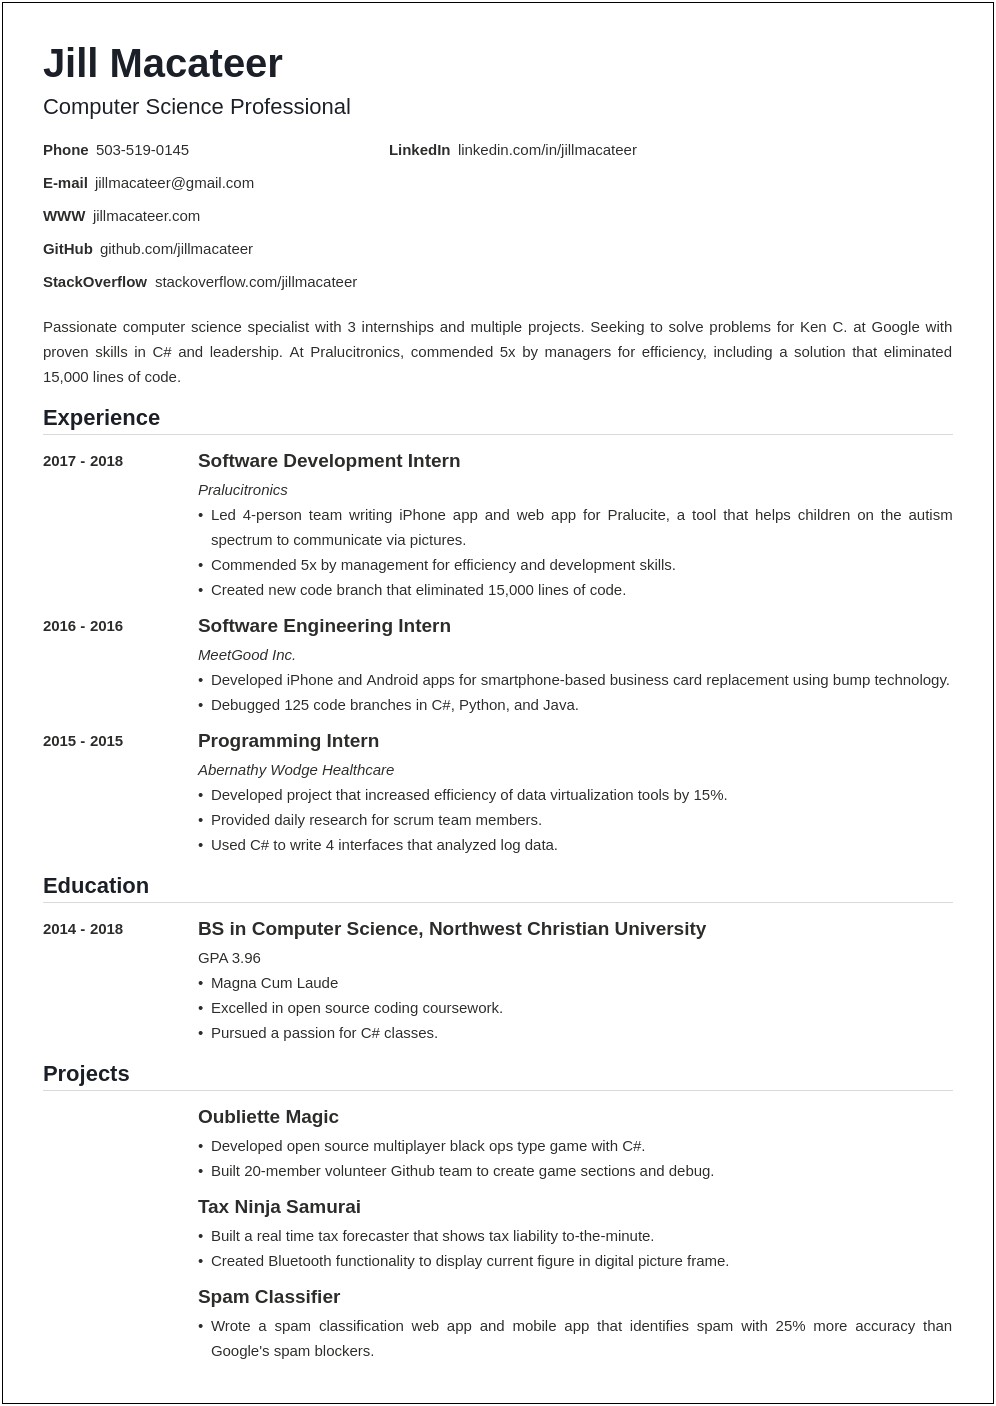 School Projects On Resume With 3 Years Experience